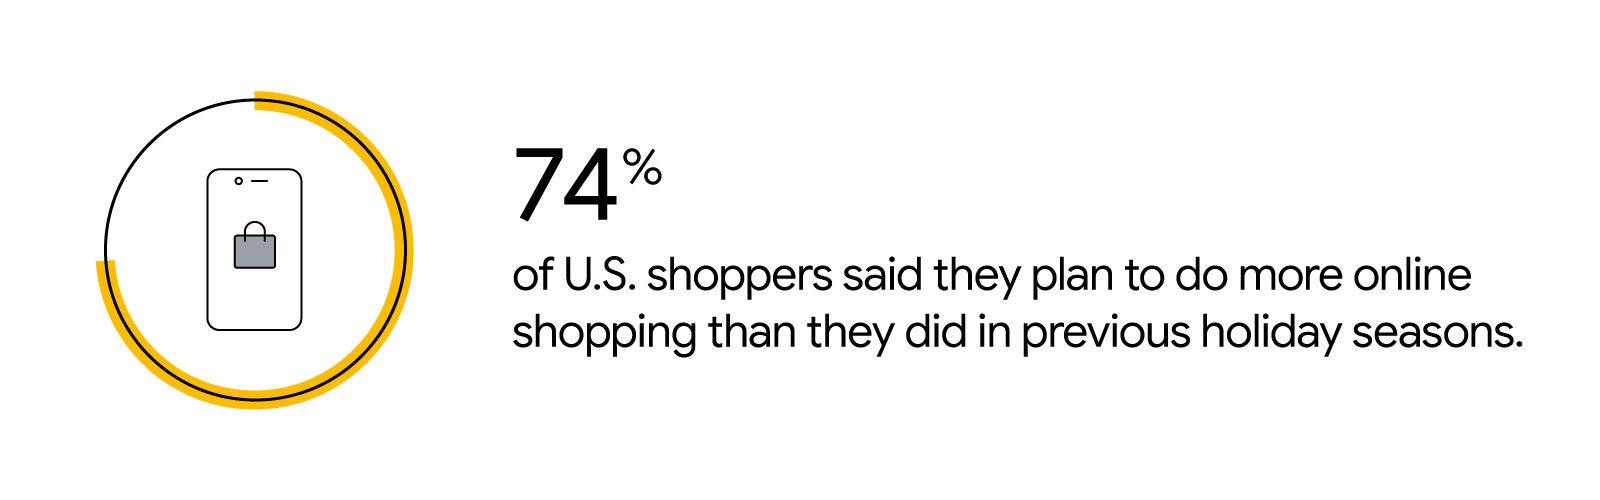 A circle graph indicates the following statistic: 74% of U.S. shoppers said they plan to do more online shopping than they did in previous holiday seasons.